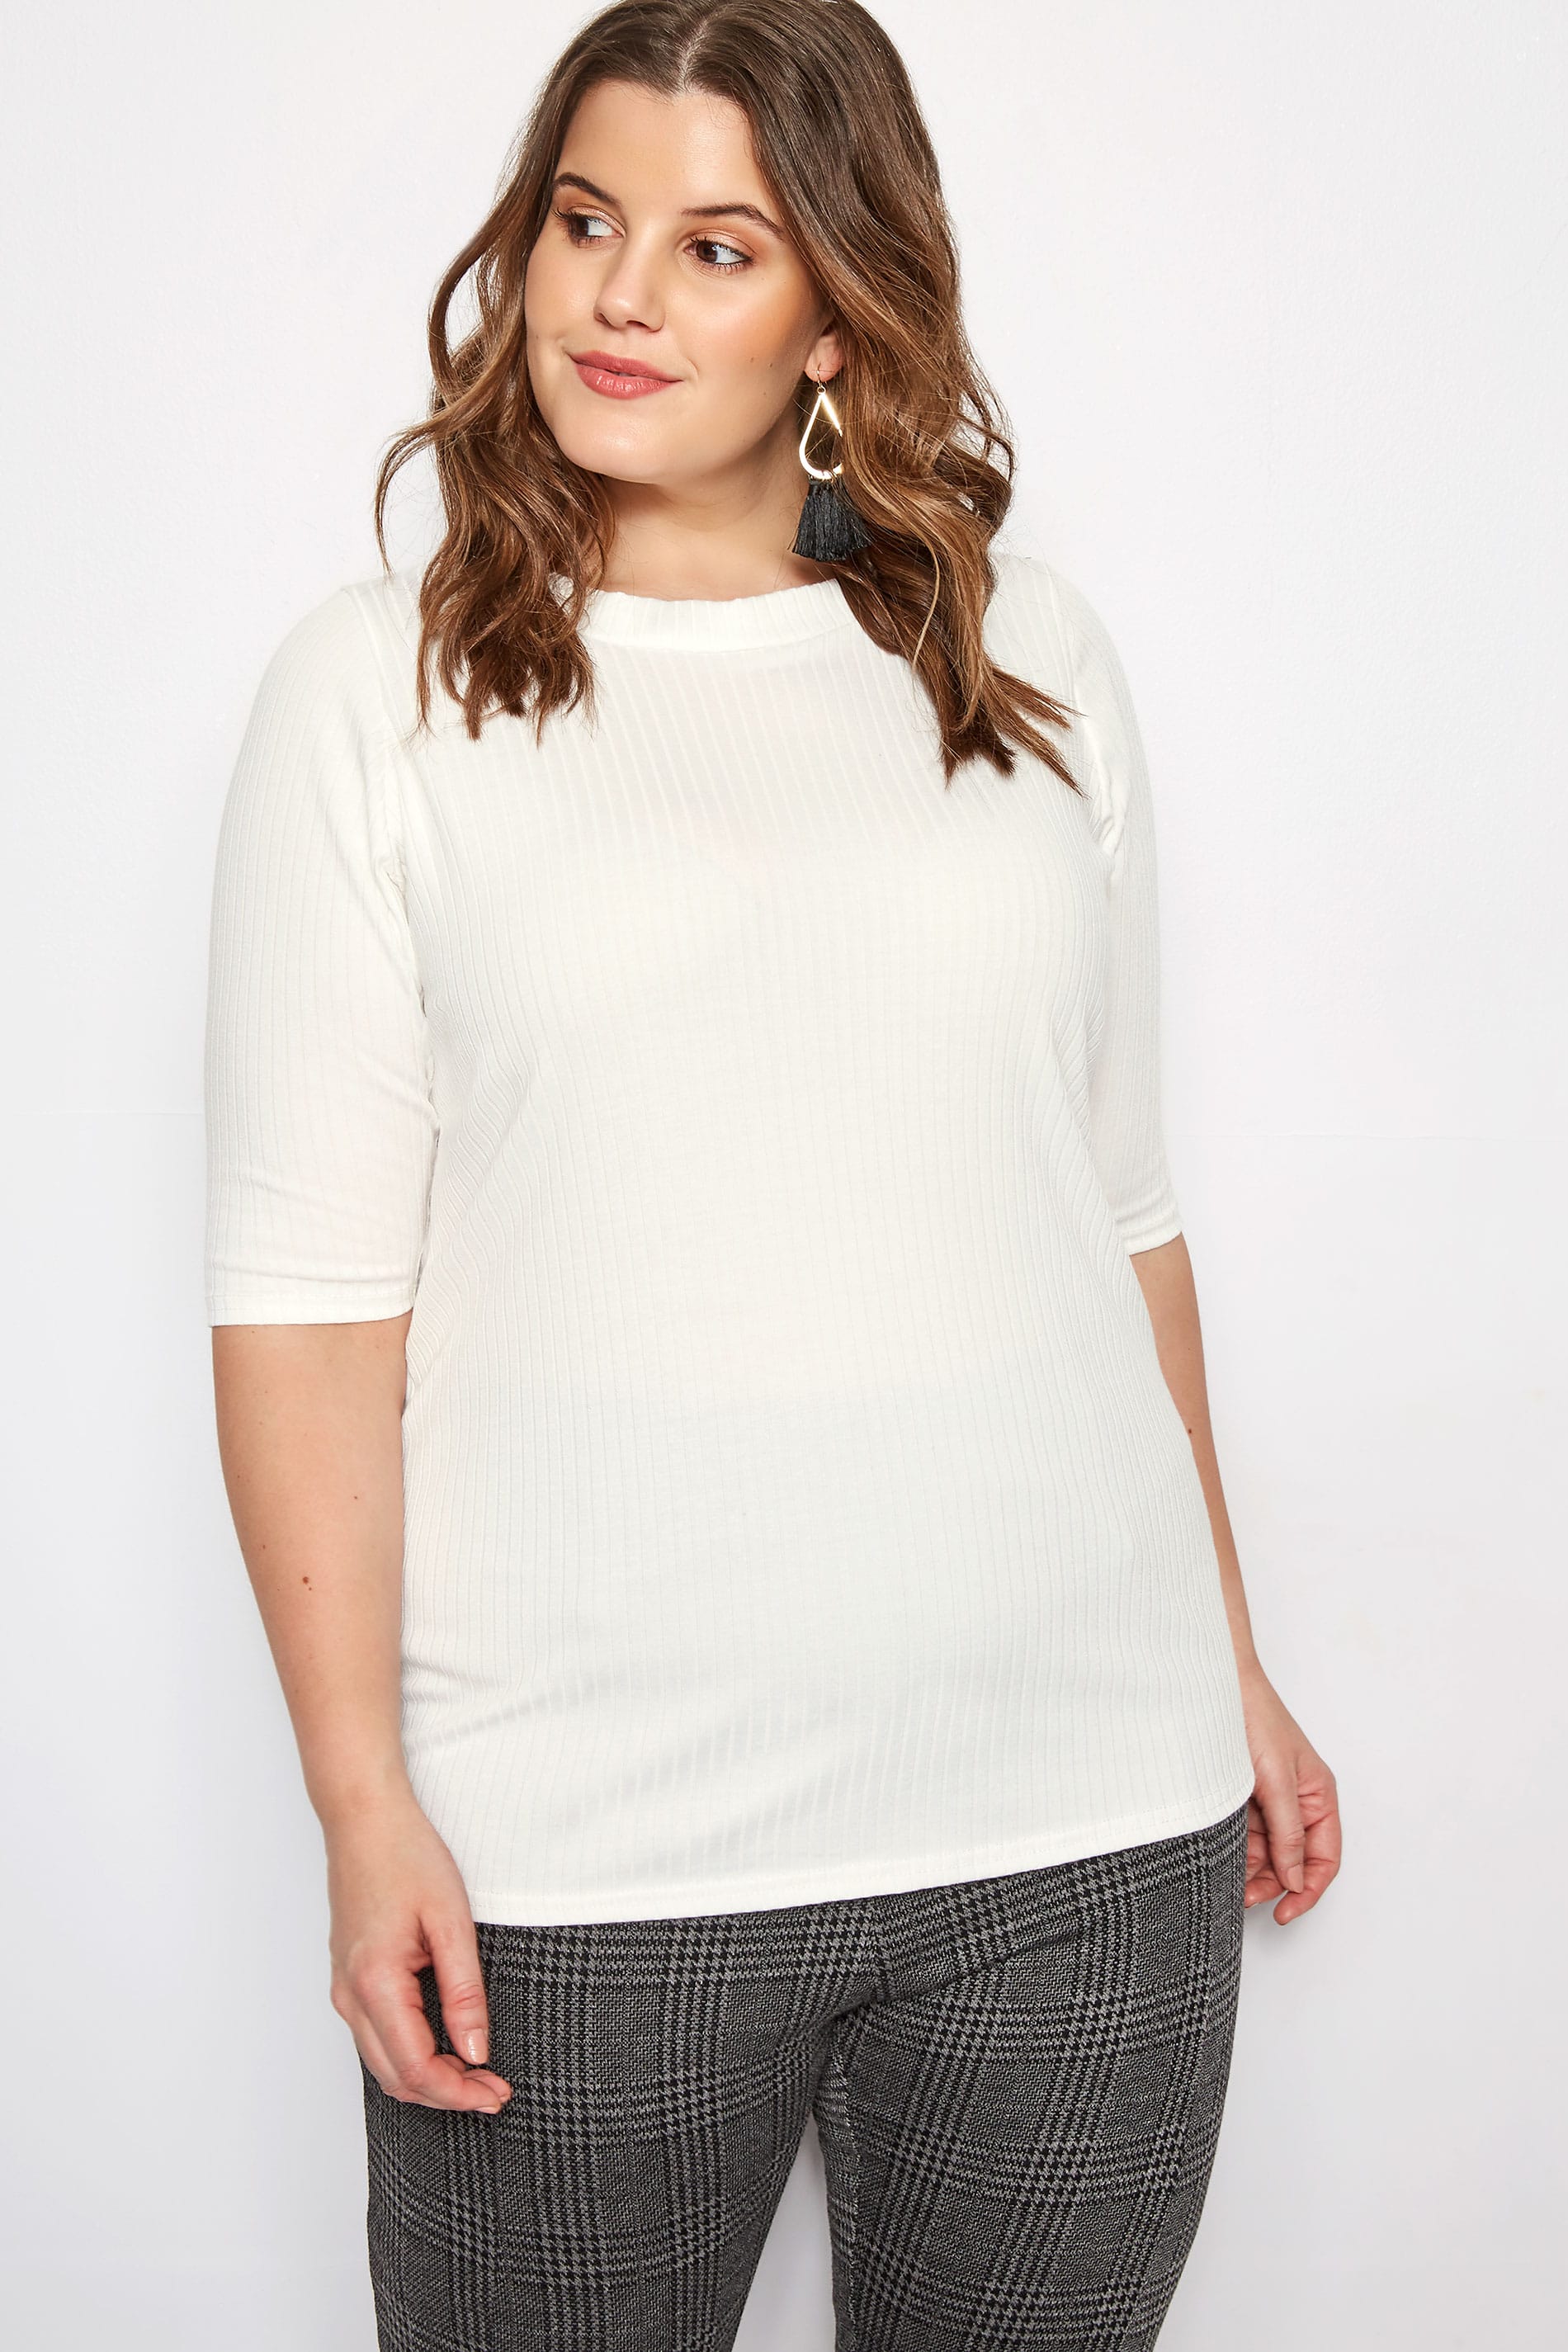 Plus Size Cream Ribbed Top | Sizes 16 to 36 | Yours Clothing